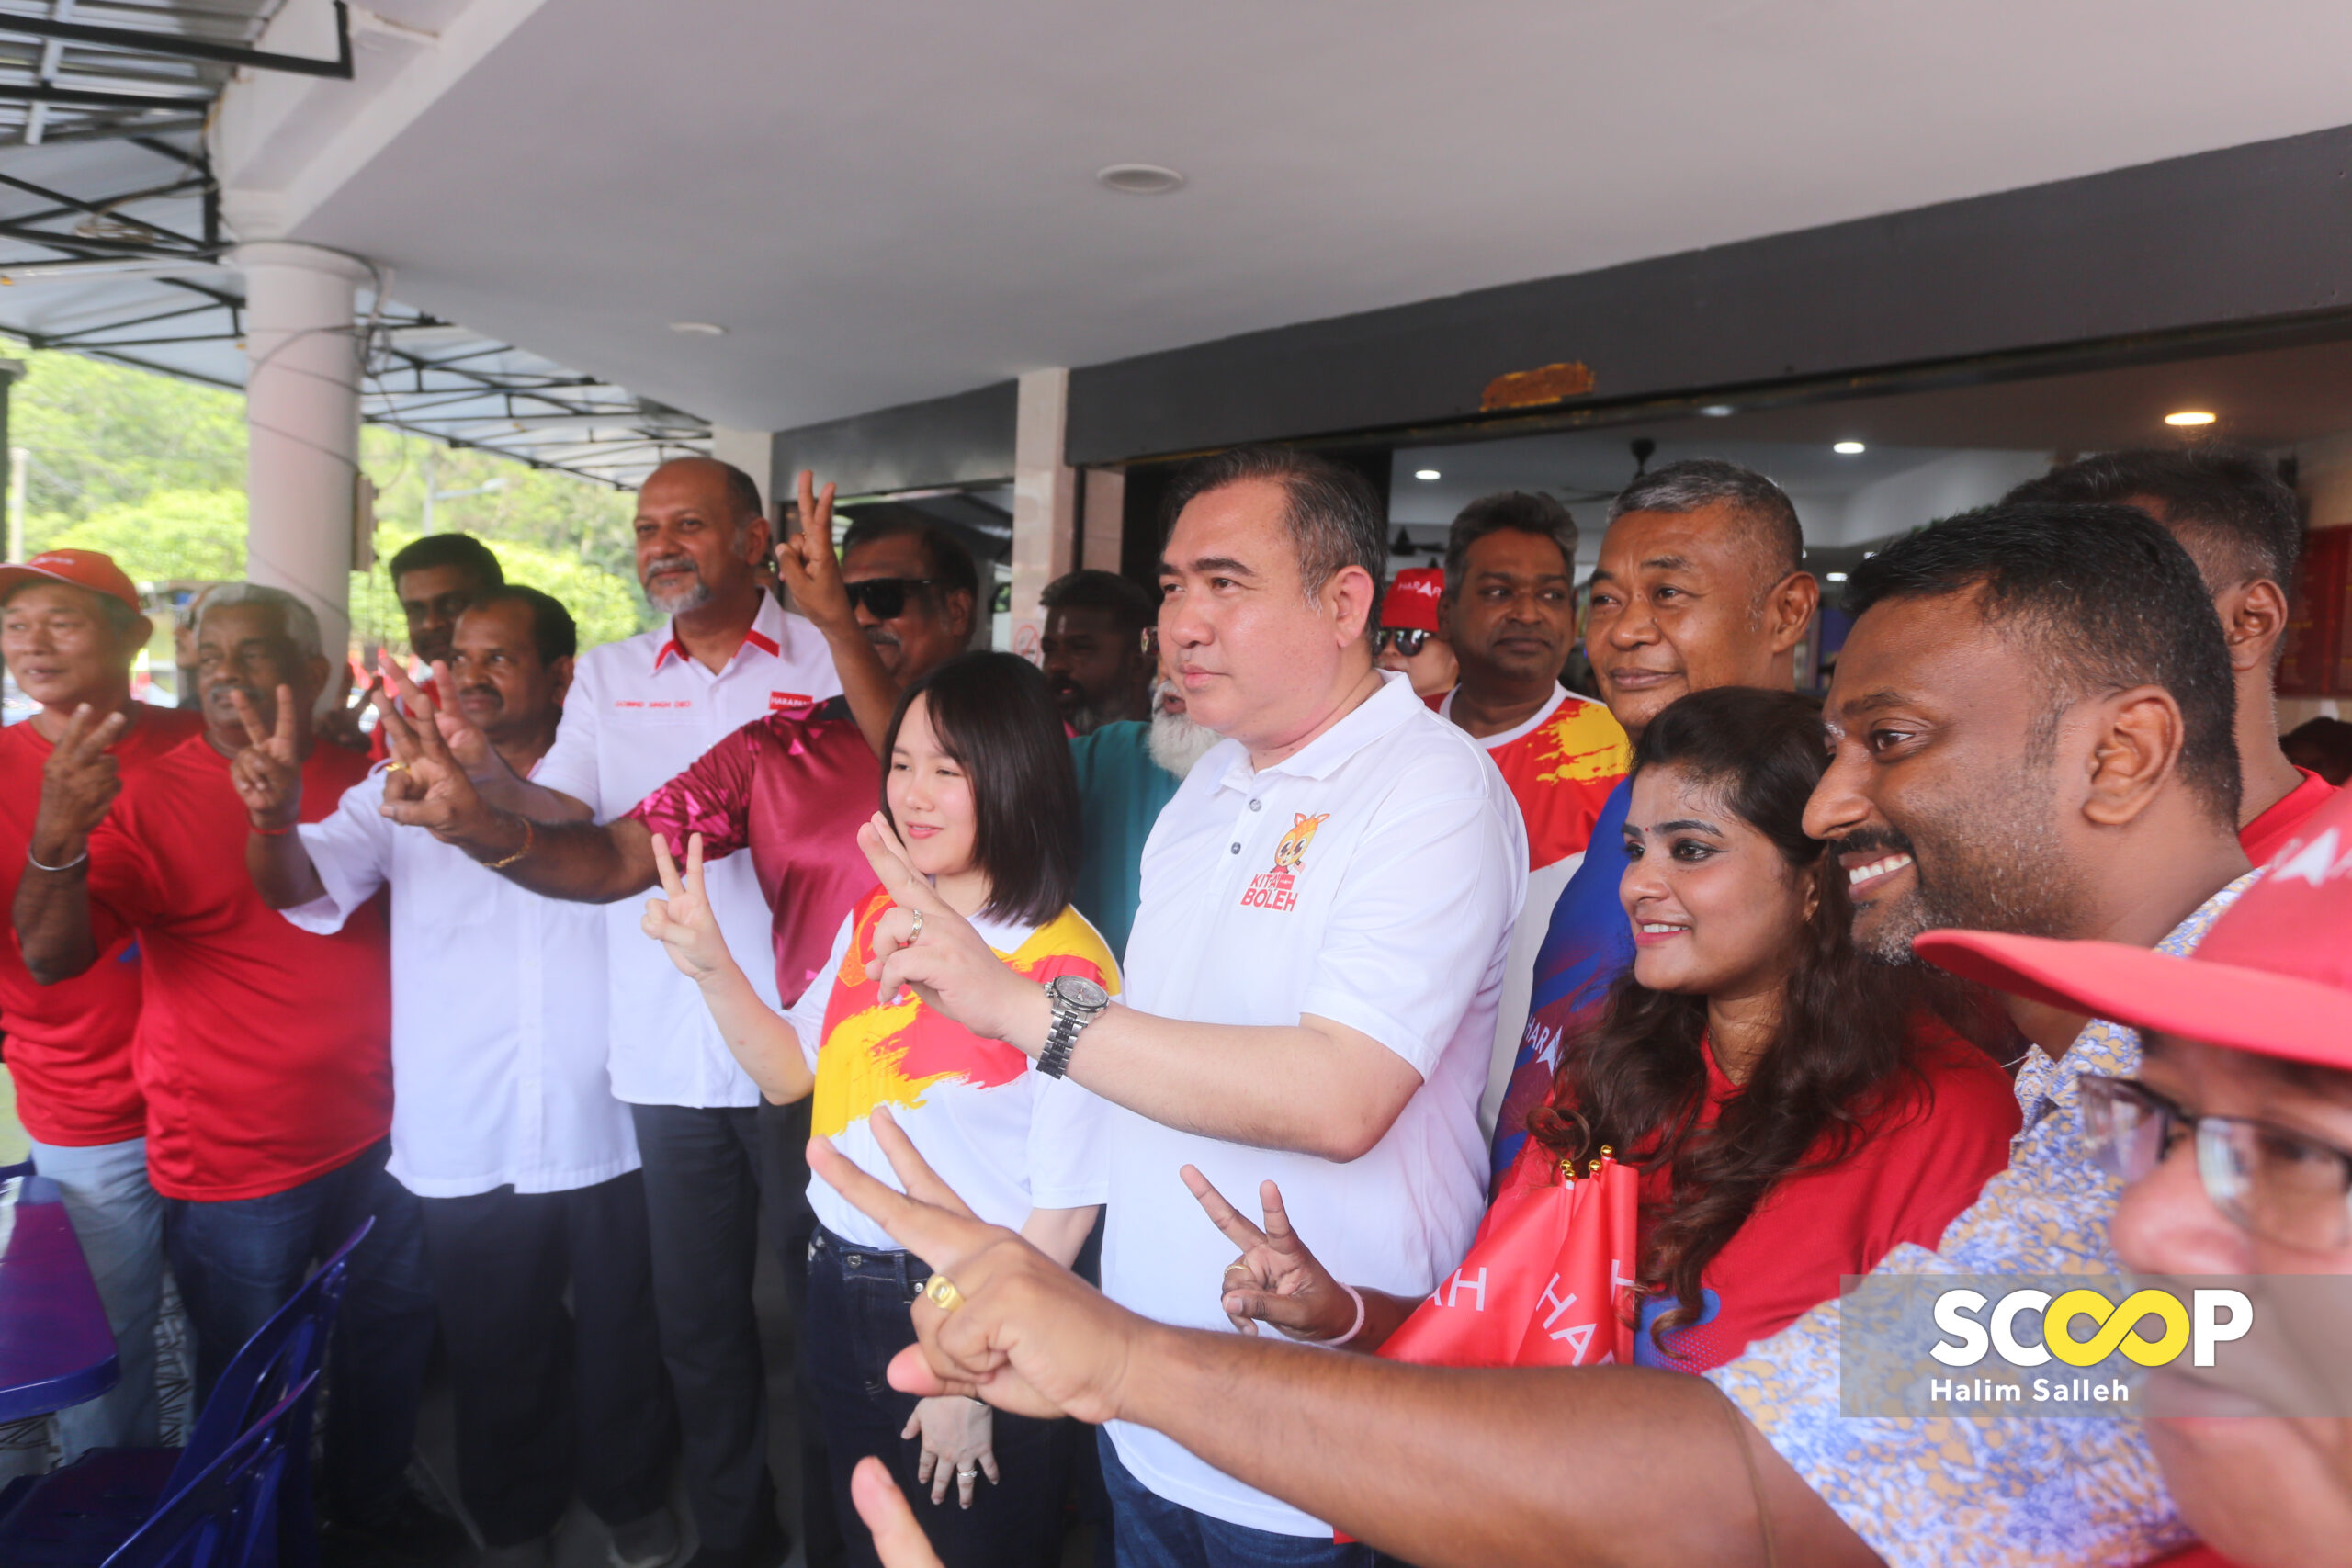 We didn’t start the fire: unity govt doesn't care about candidates’ academic qualifications, says Loke